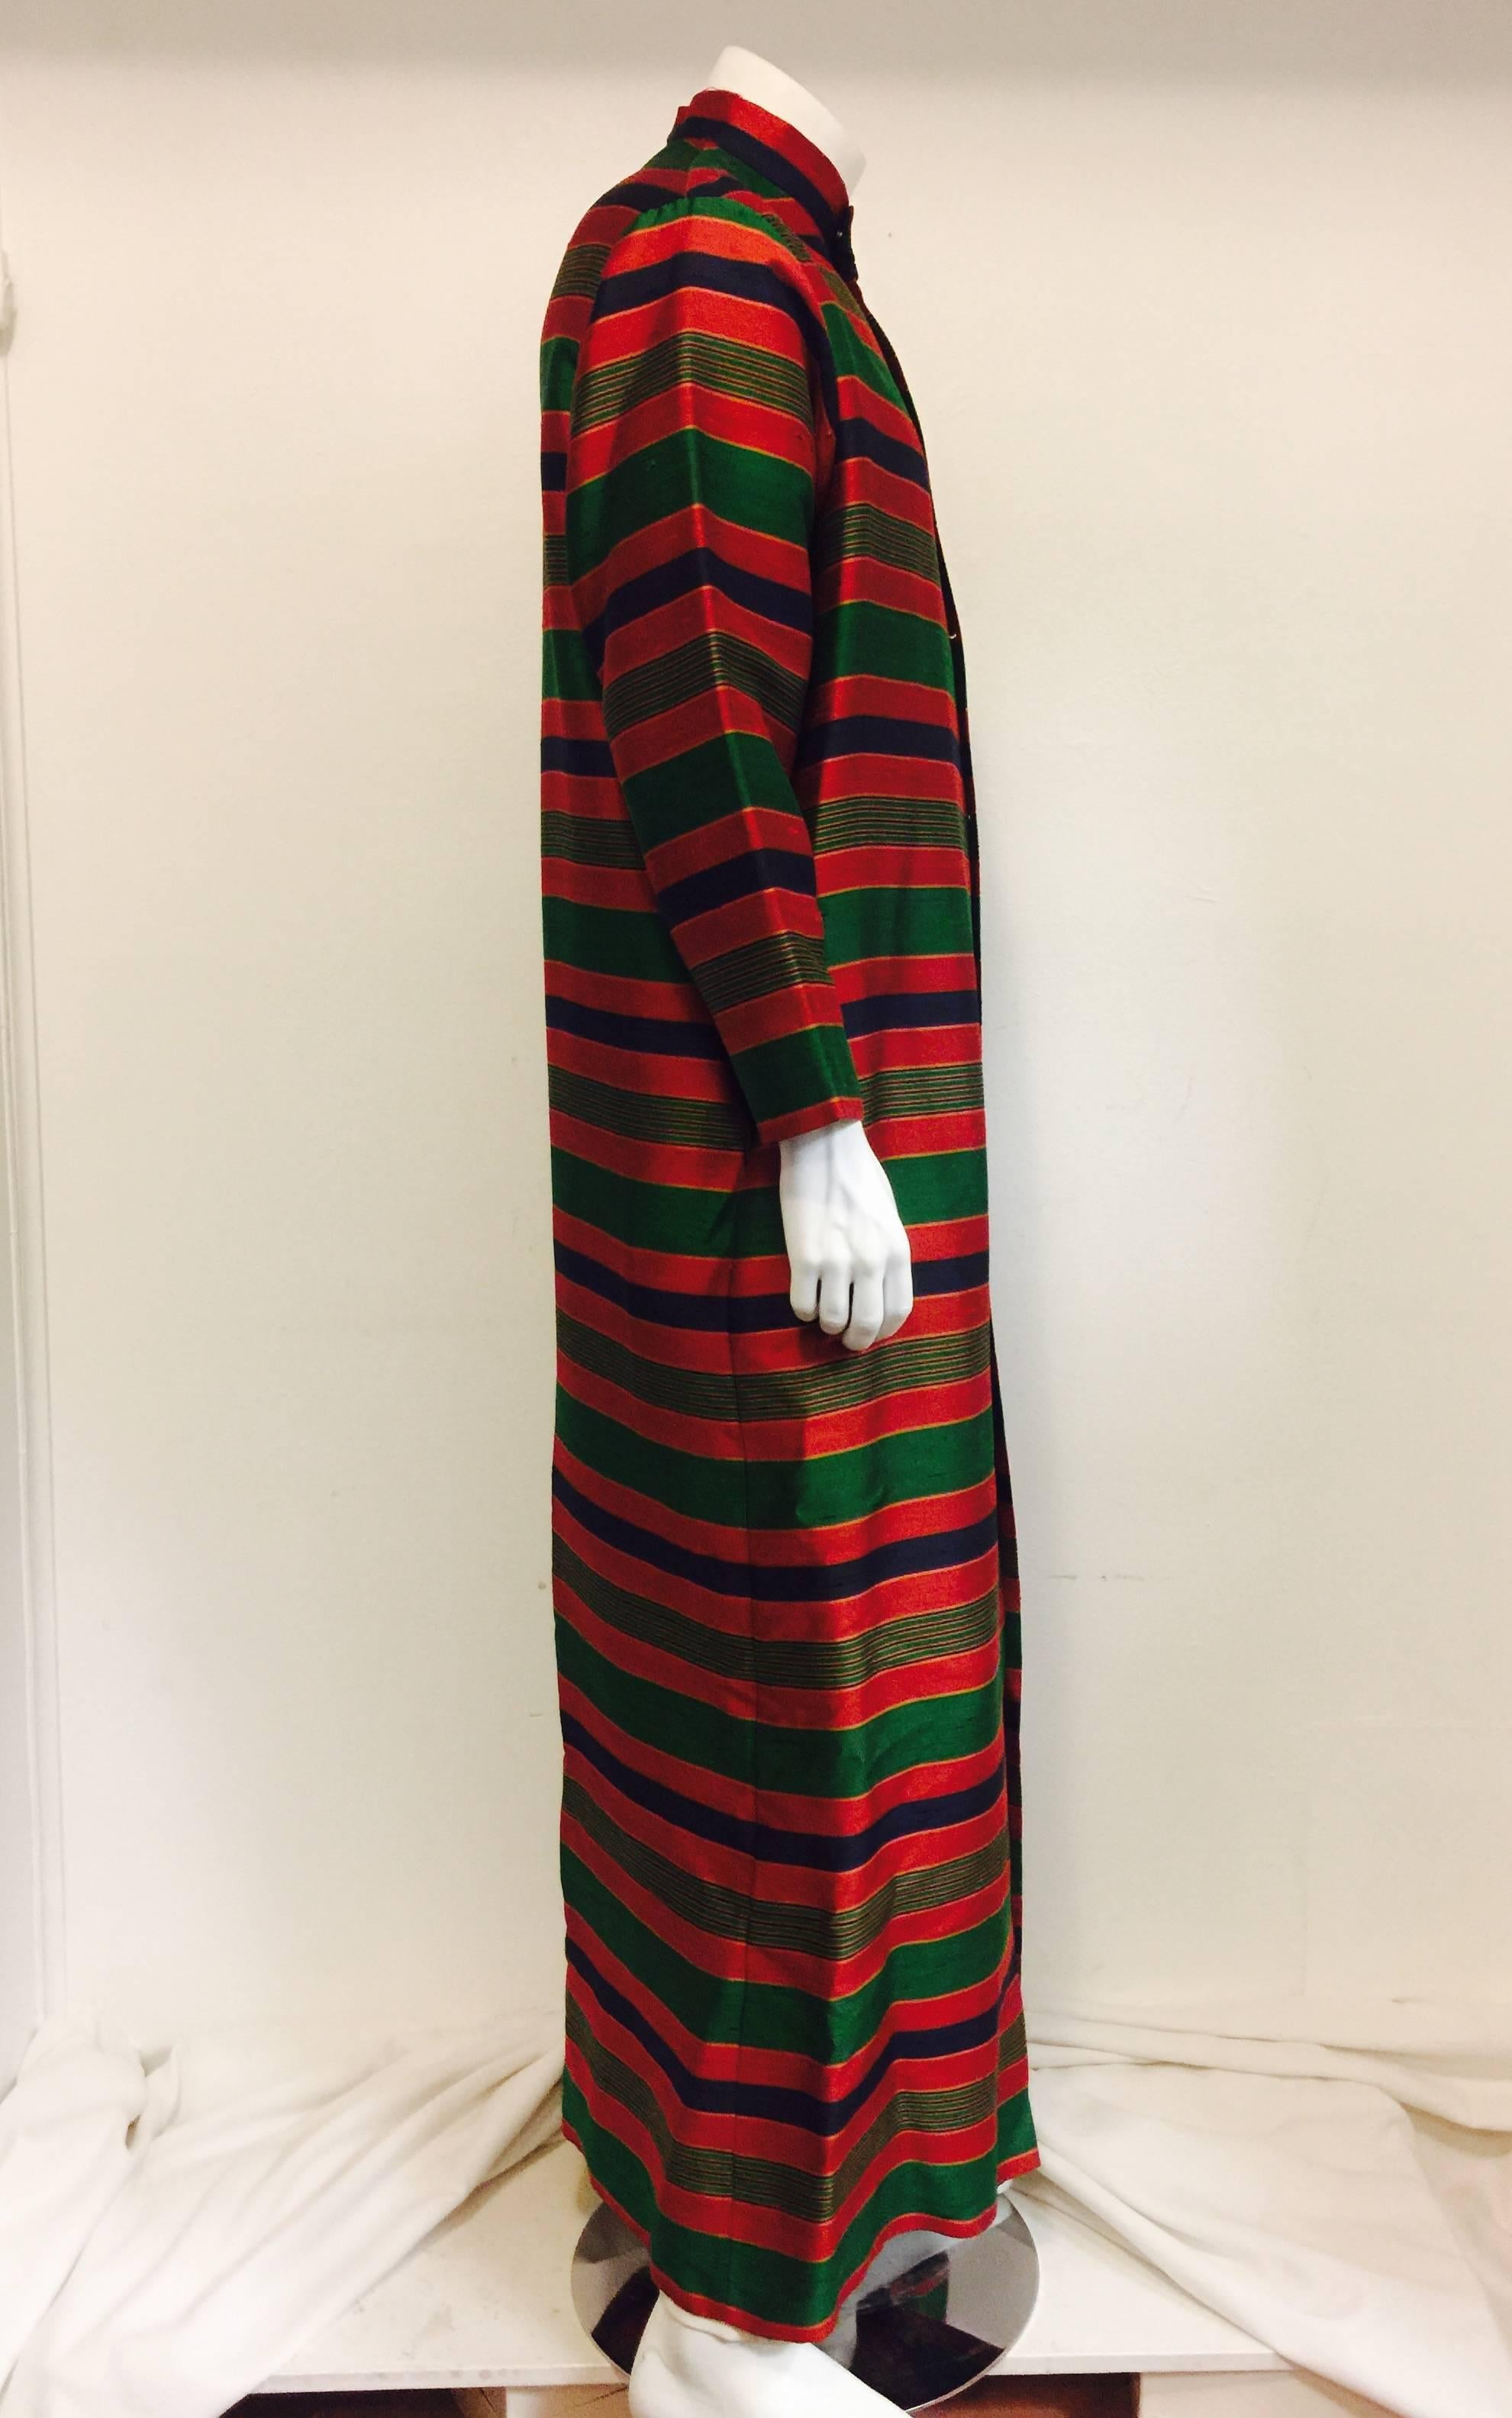 Alexander Shields was a fashion house from the 1950's to 1970's on Park Avenue, N.Y.  This fabulous vintage robe is in  multi coloured jewel tones stripe slub textured acetate, with the look of slub silk.  Seven mother of pearl snap buttons in